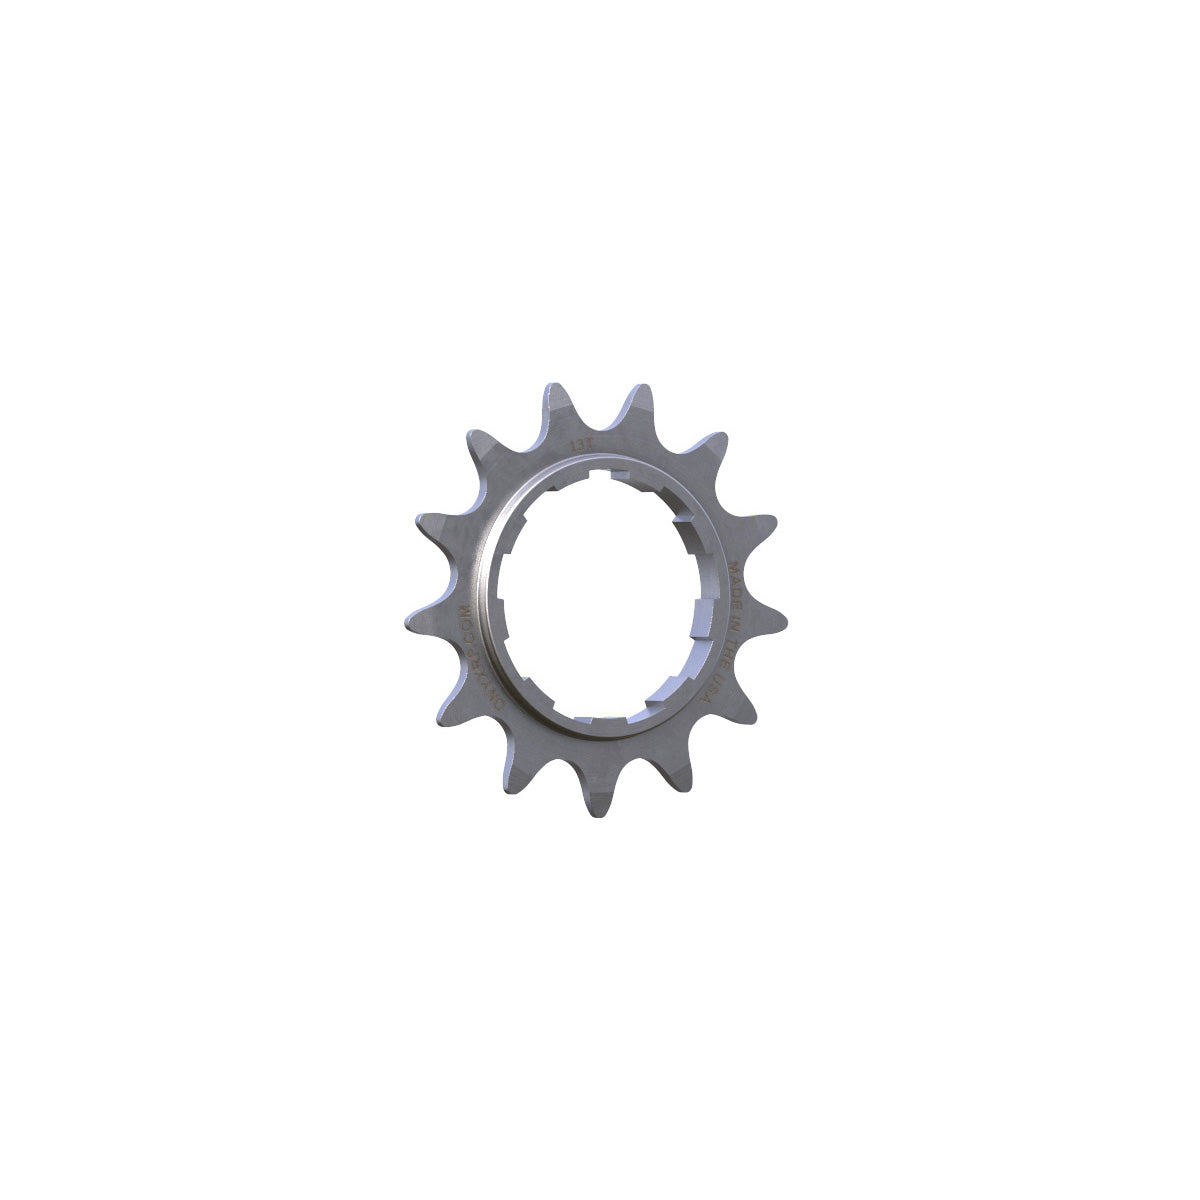 Onyx Racing 13t Stainless Steel Cog for BMX Cassette hubs - 3/32"